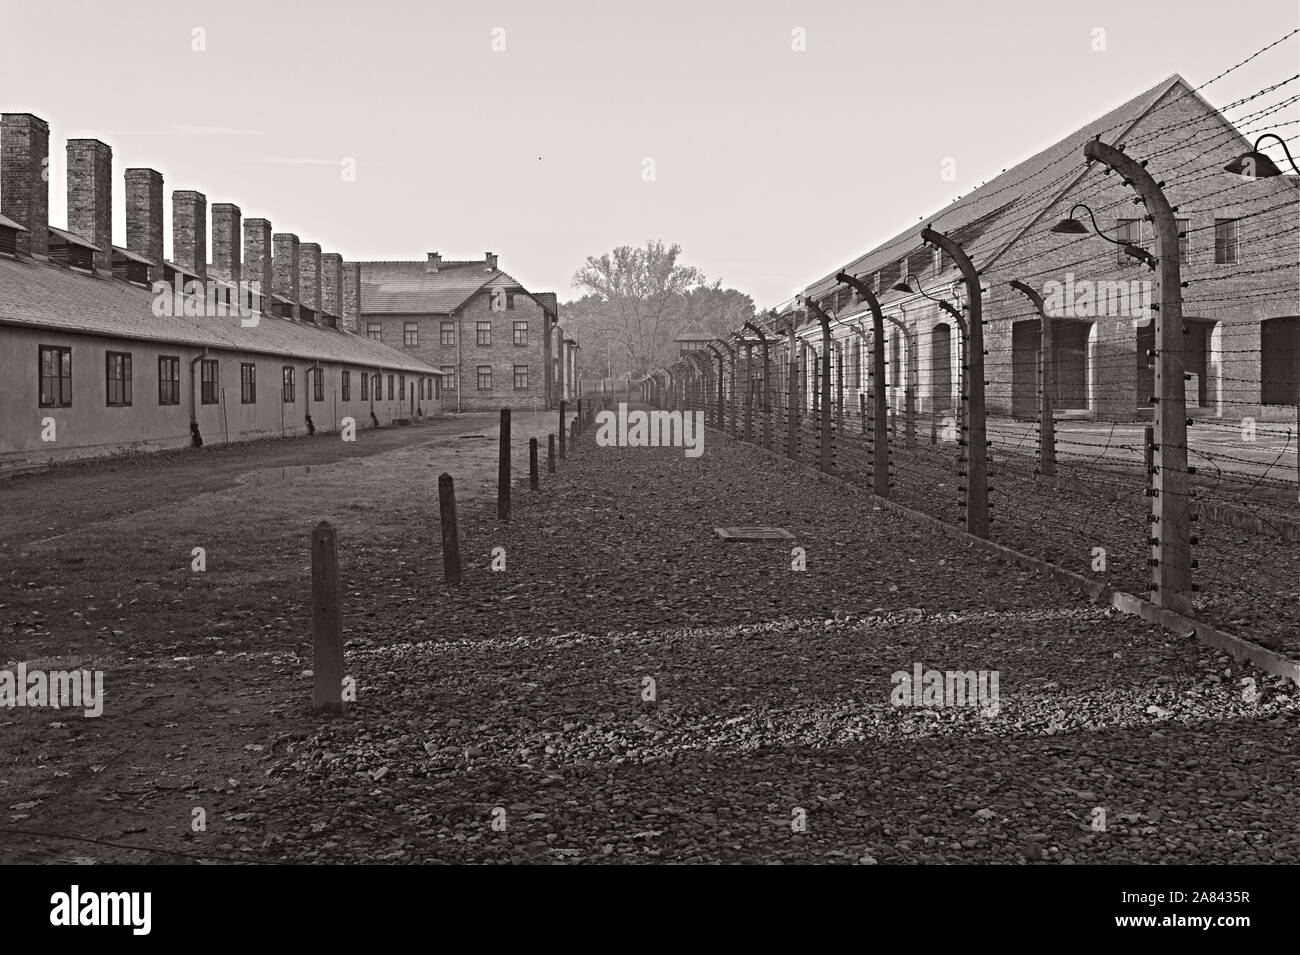 Auschwitz memorial museum, black and white photography Stock Photo